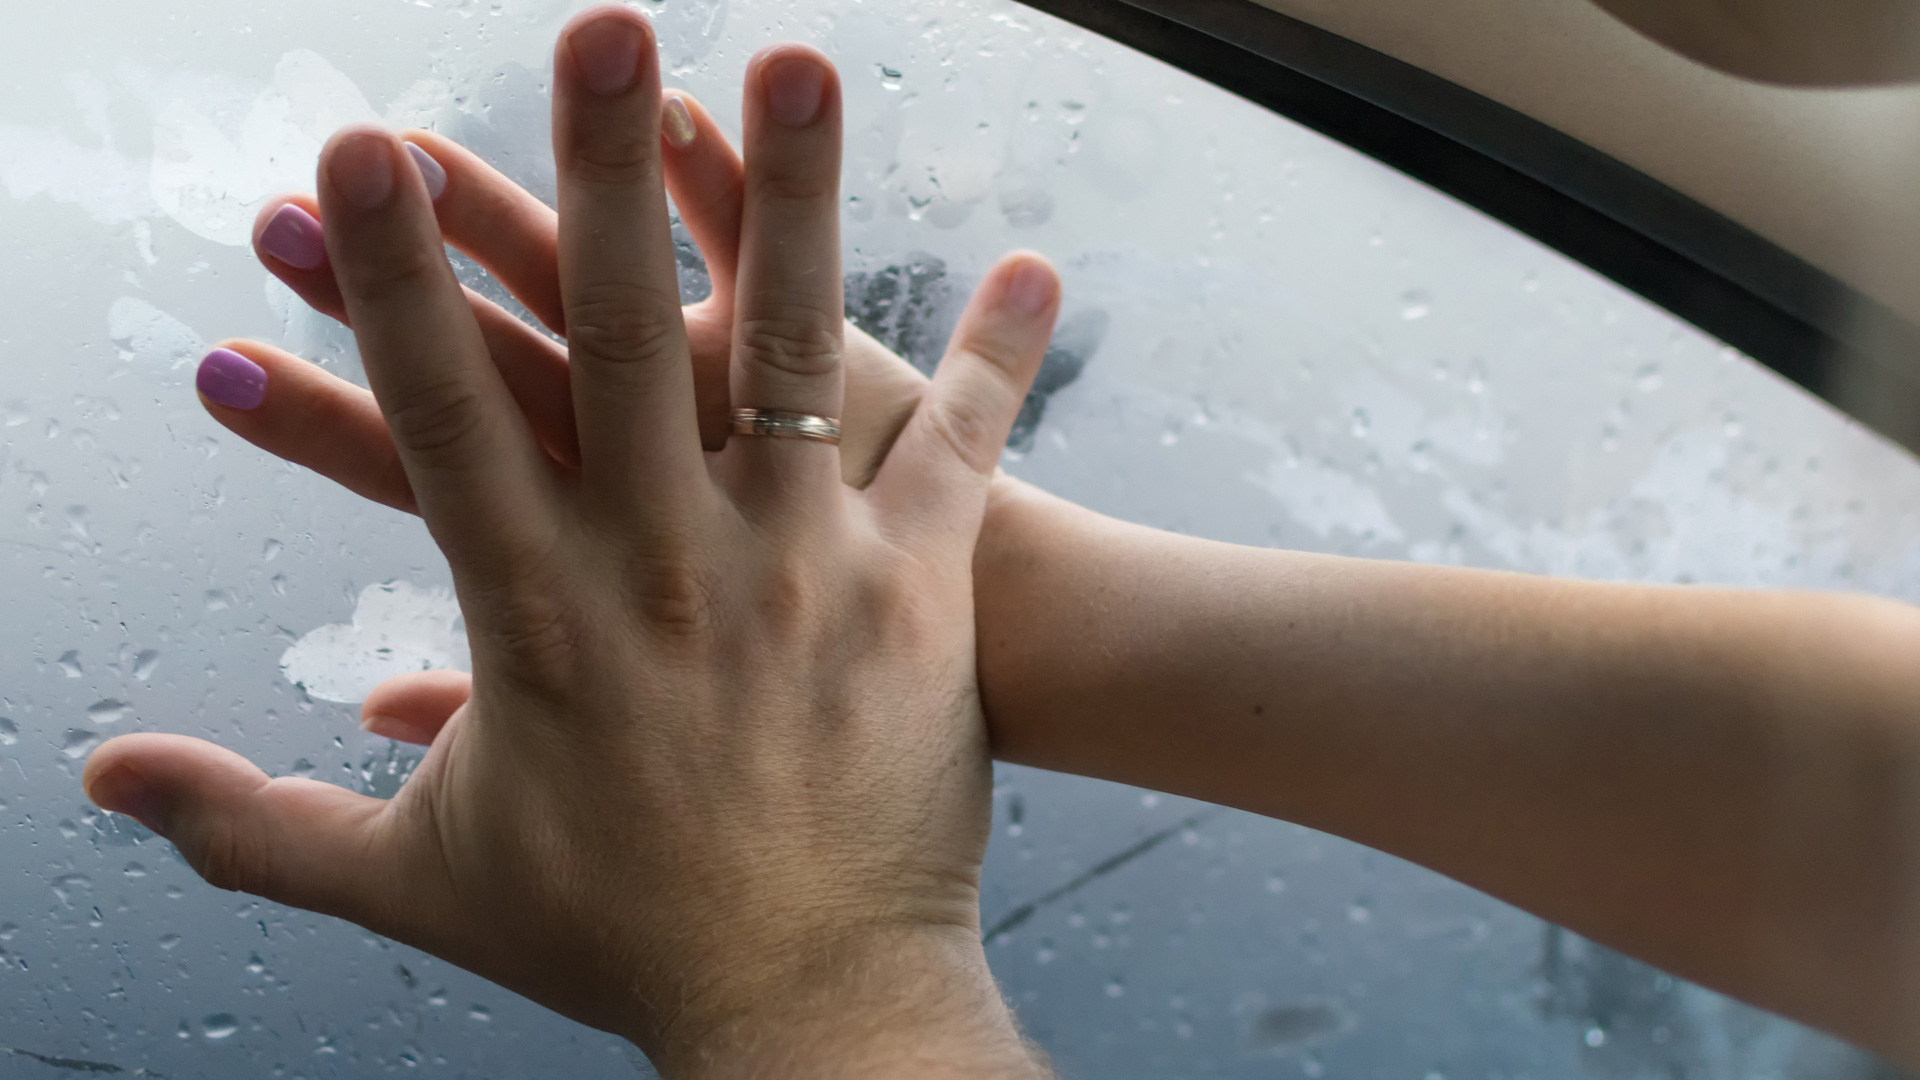 Hands of a man and a woman against a foggy car window. The man's hand has a ring while pushing the woman's against the window